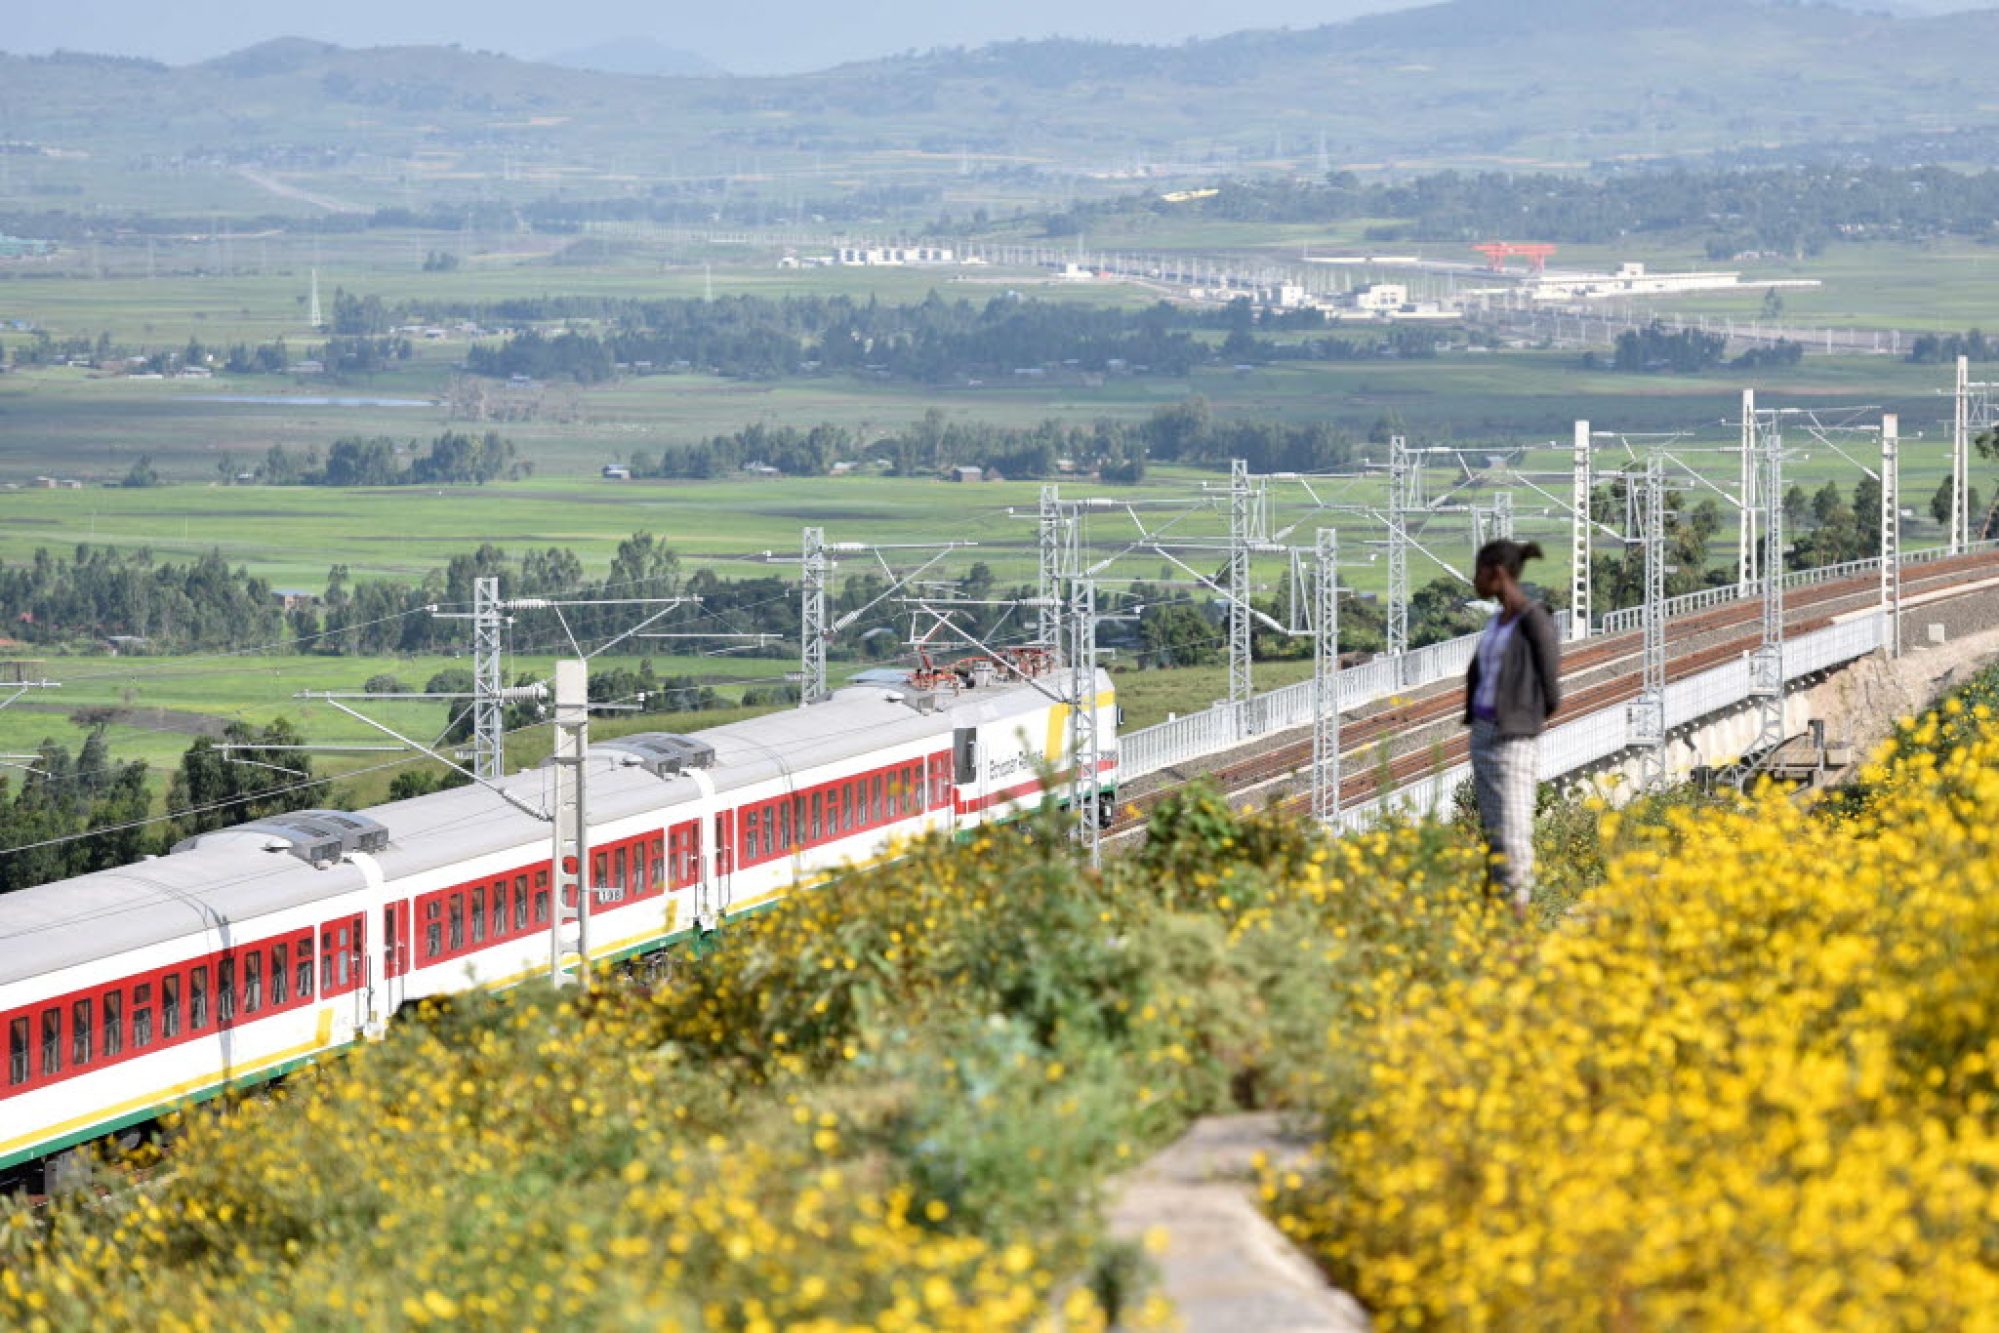 A train runs on the Ethiopia-Djibouti Railway built by Chinese firms. Beijing has invested heavily in both countries and across the Horn of Africa. Photo: Xinhua